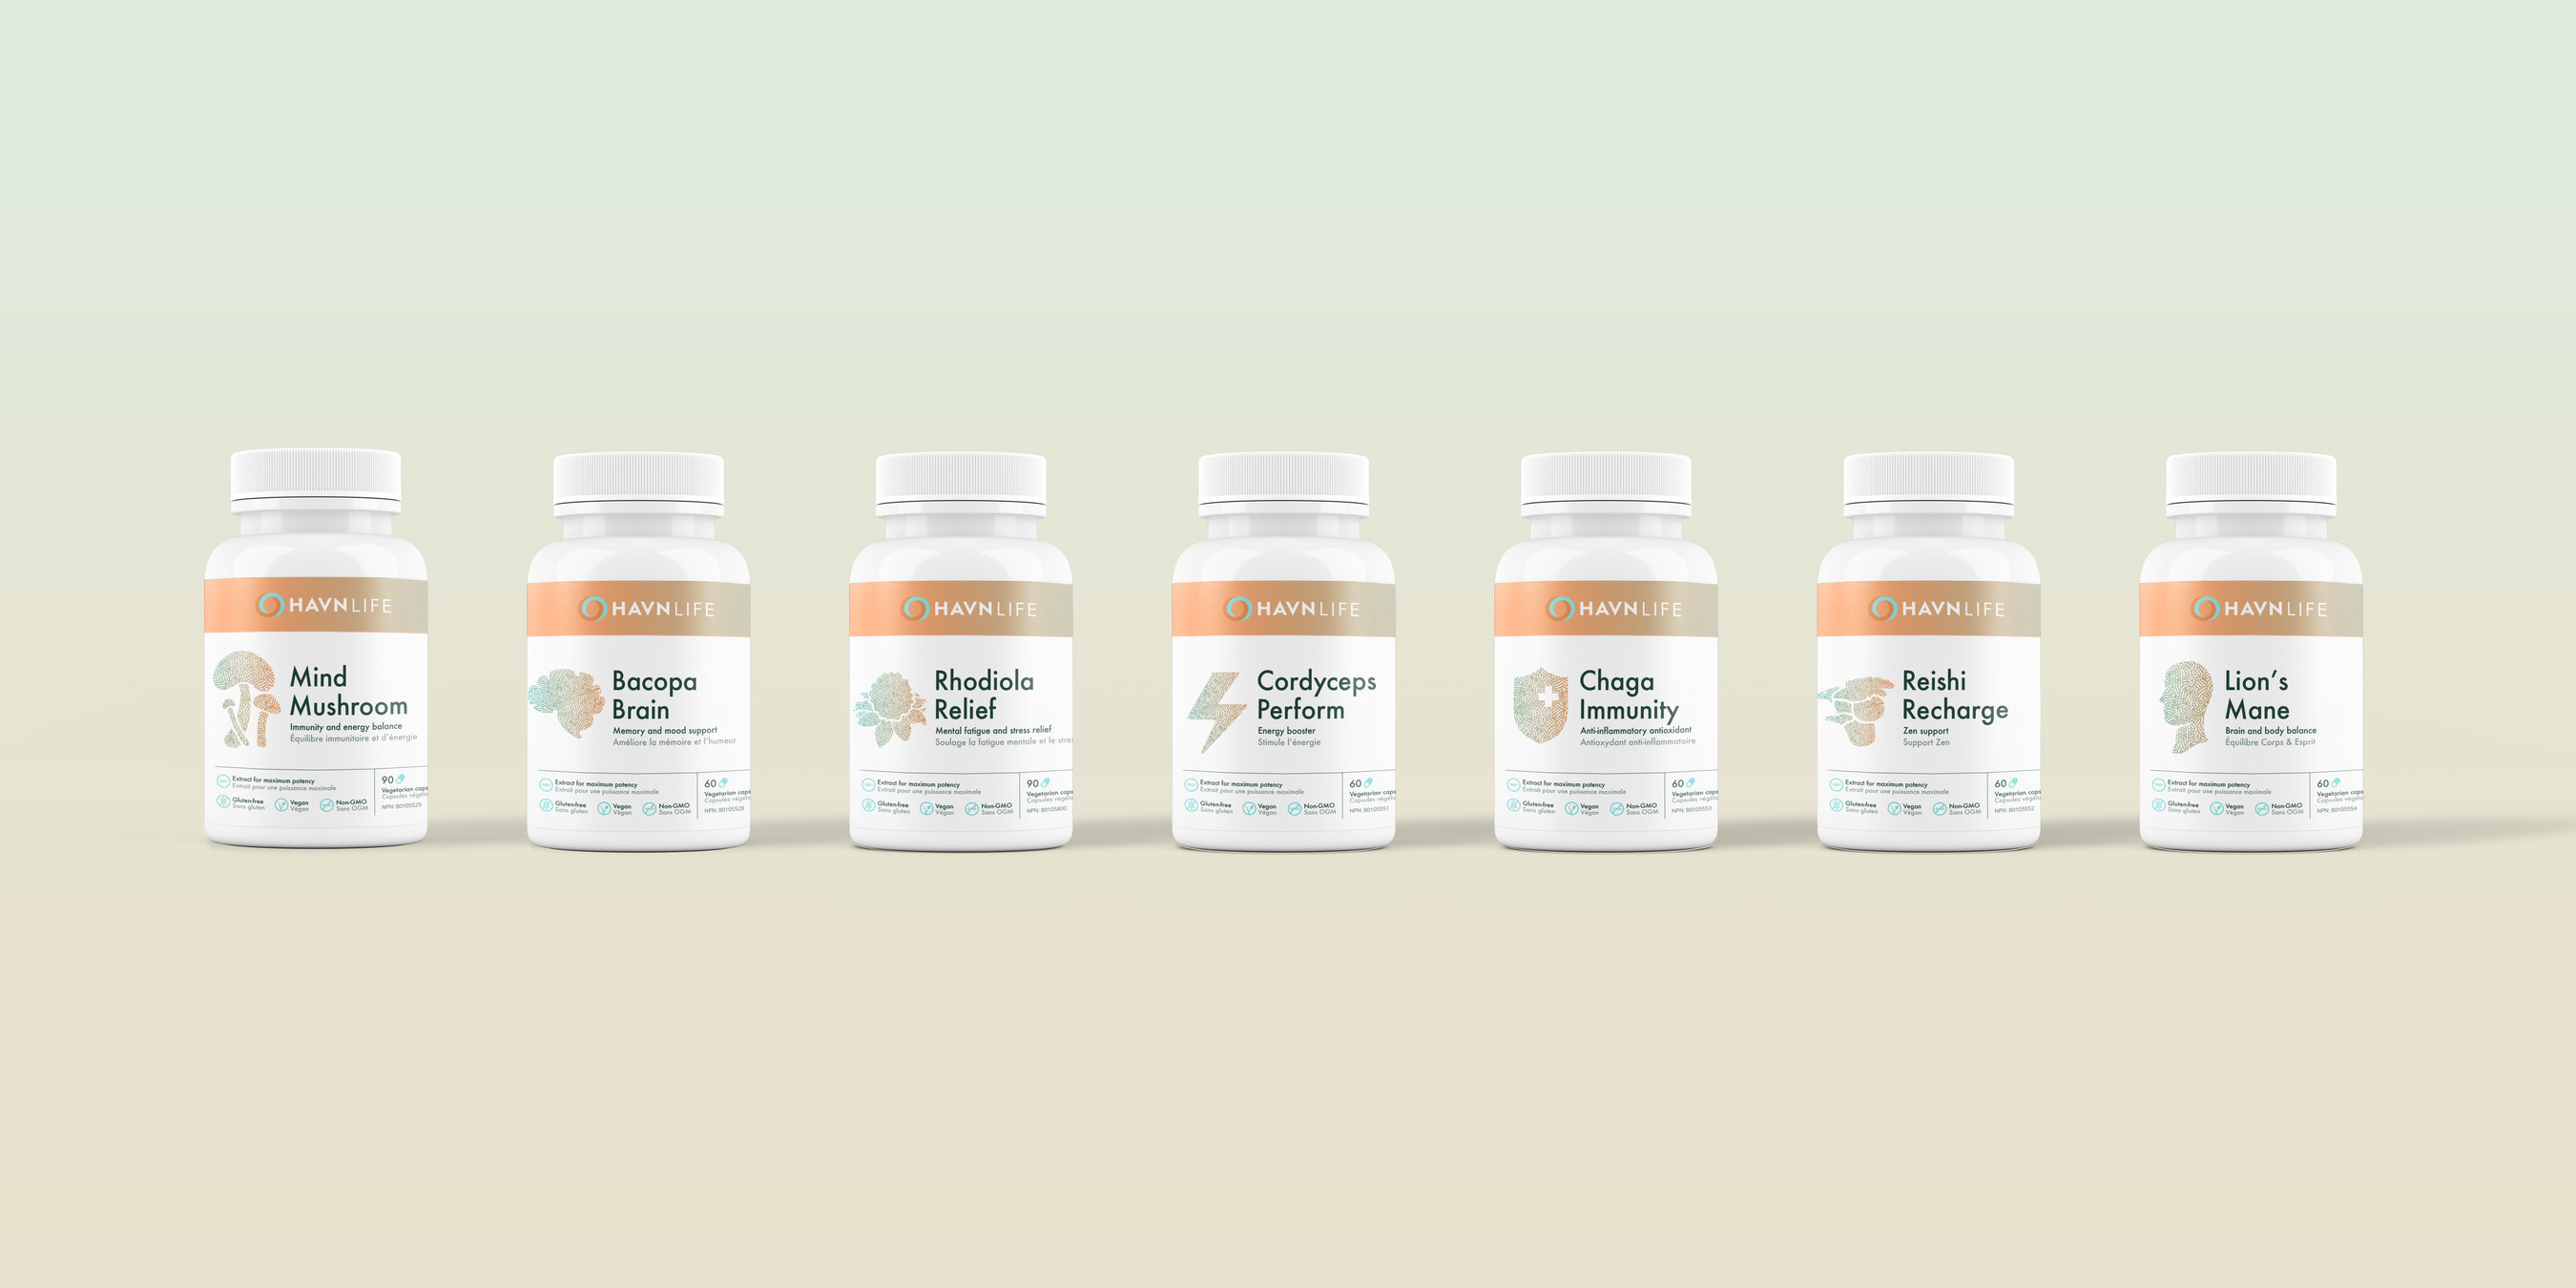 Seven new formulations that support brain health and immune function will be available online and at select retail locations starting June 3 (CNW Group/HAVN Life)